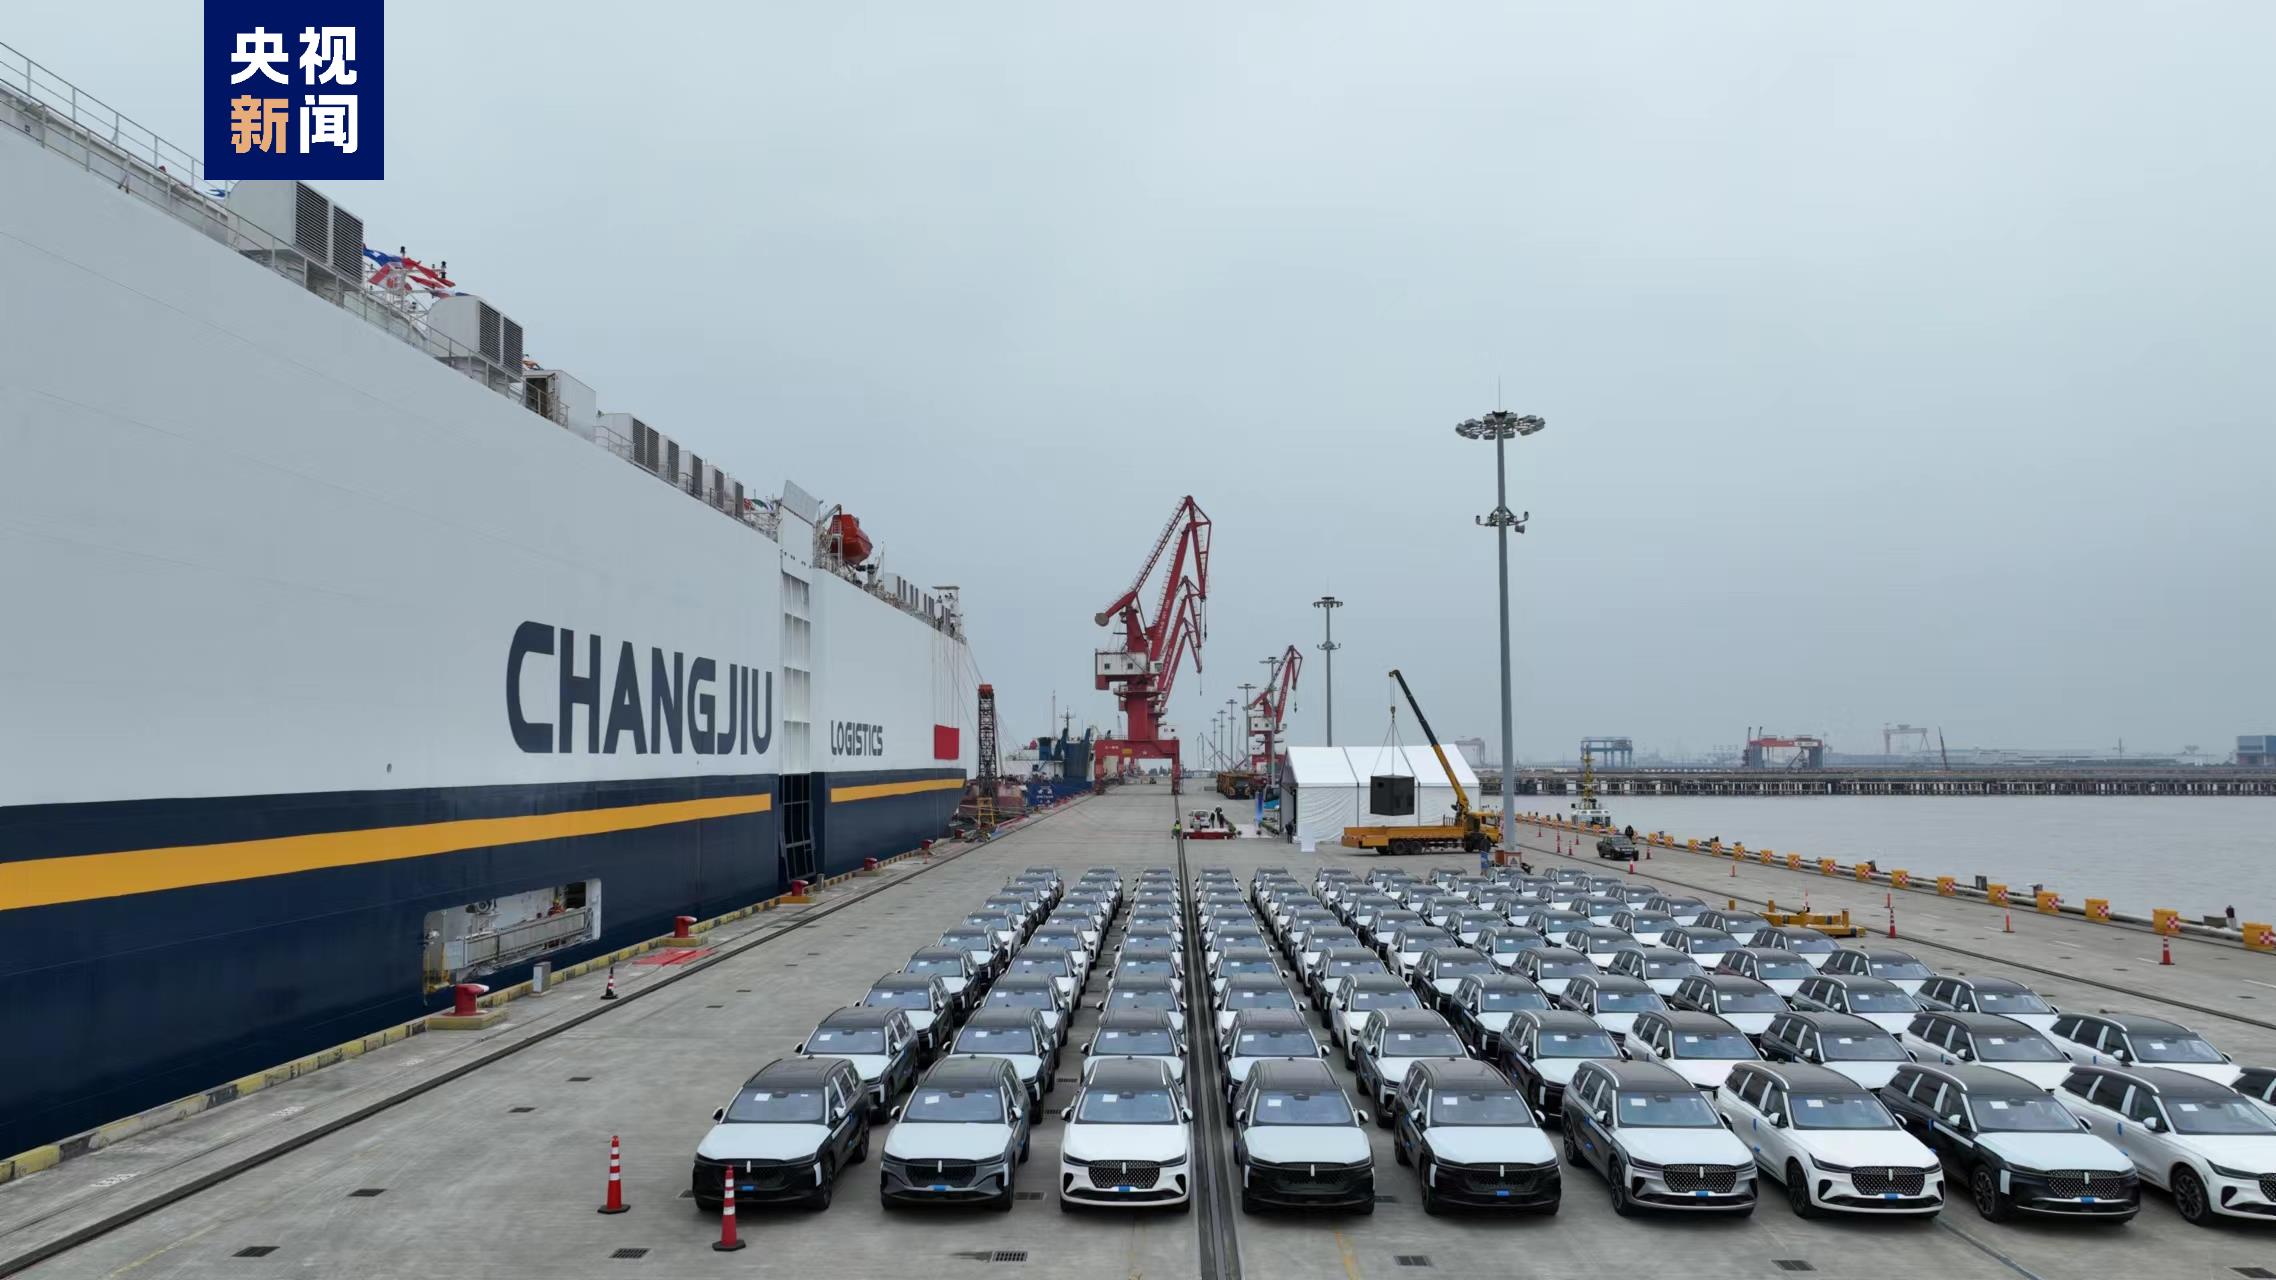 Ro-ro ships make it easier for ports to load and unload cars. /CMG